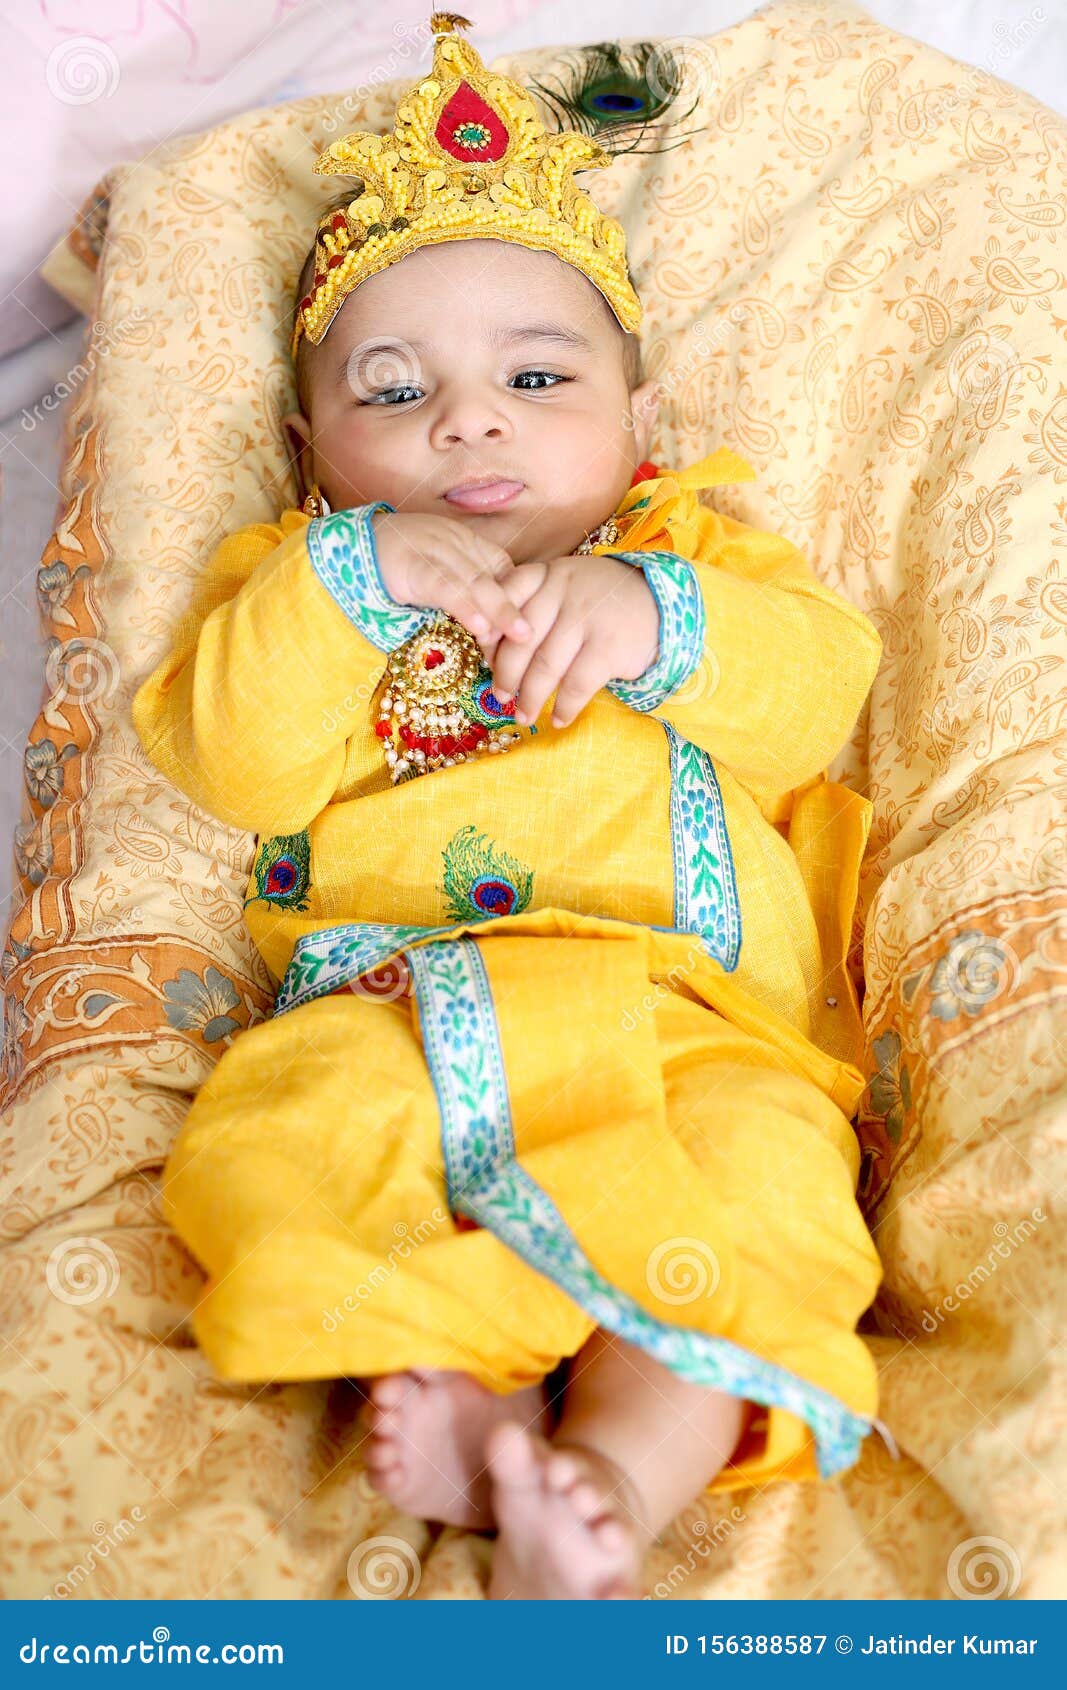 Picture of Baby krishna. stock image. Image of hinduism - 156388587